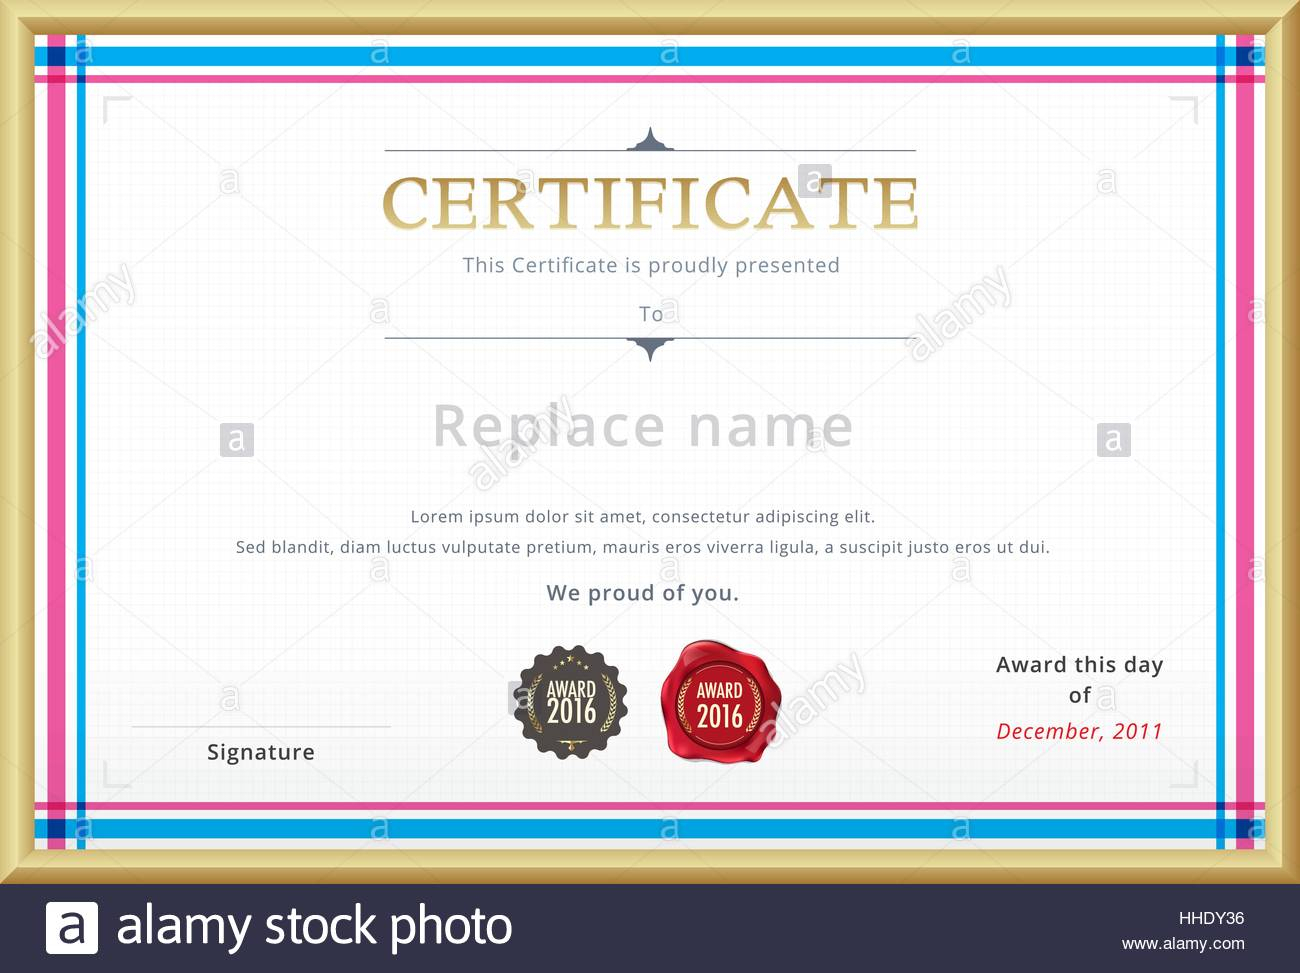 Qualification Certificate Template Stock Photos Throughout Qualification Certificate Template